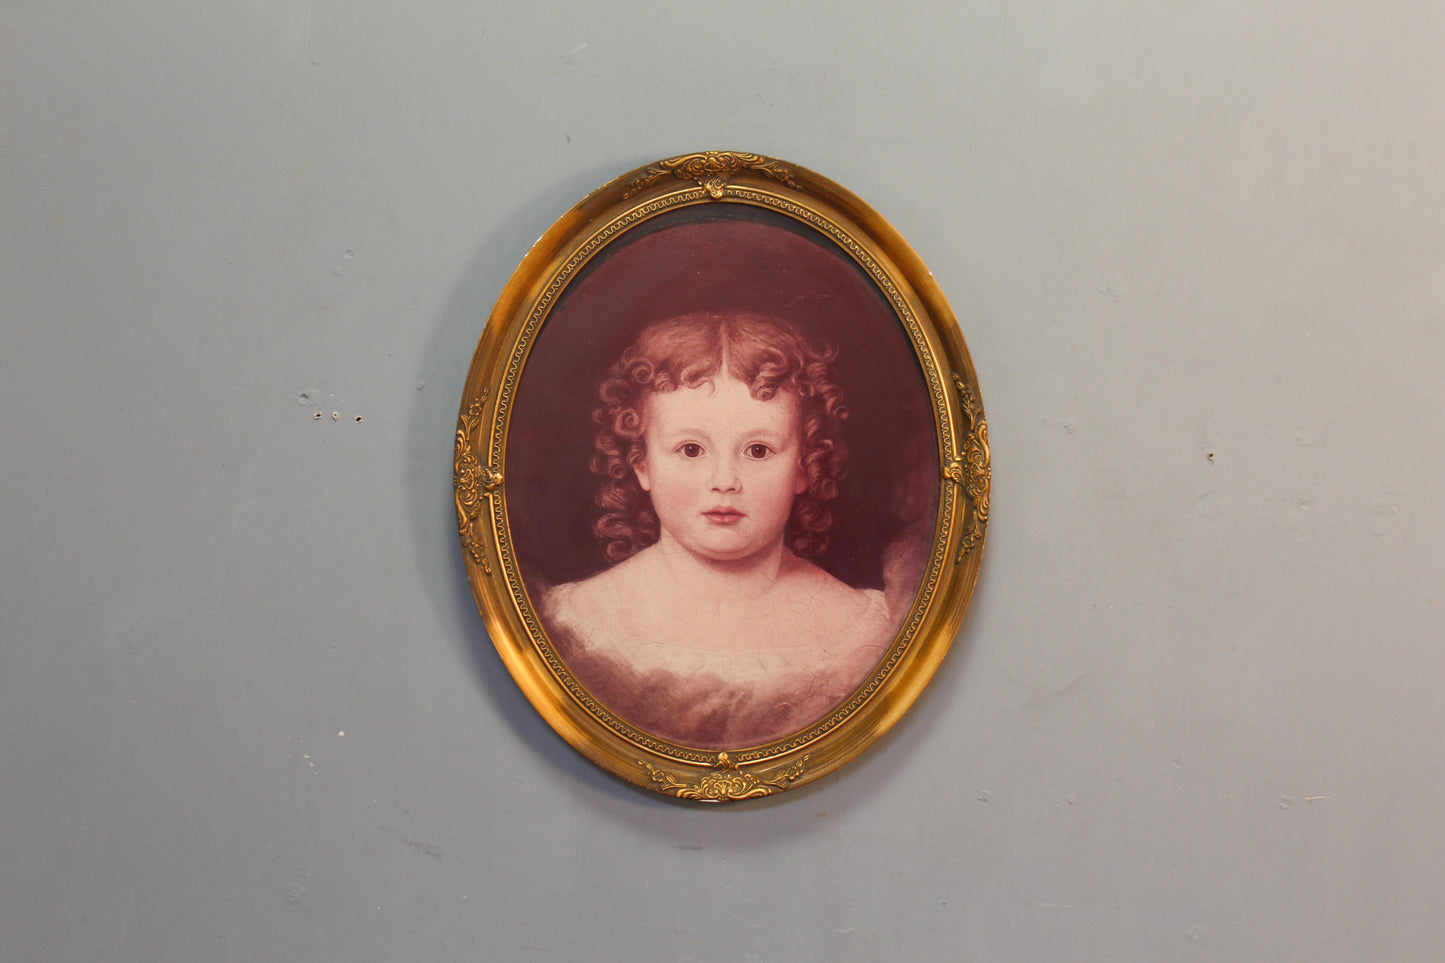 Antique "Girl with Ringlets" Portrait